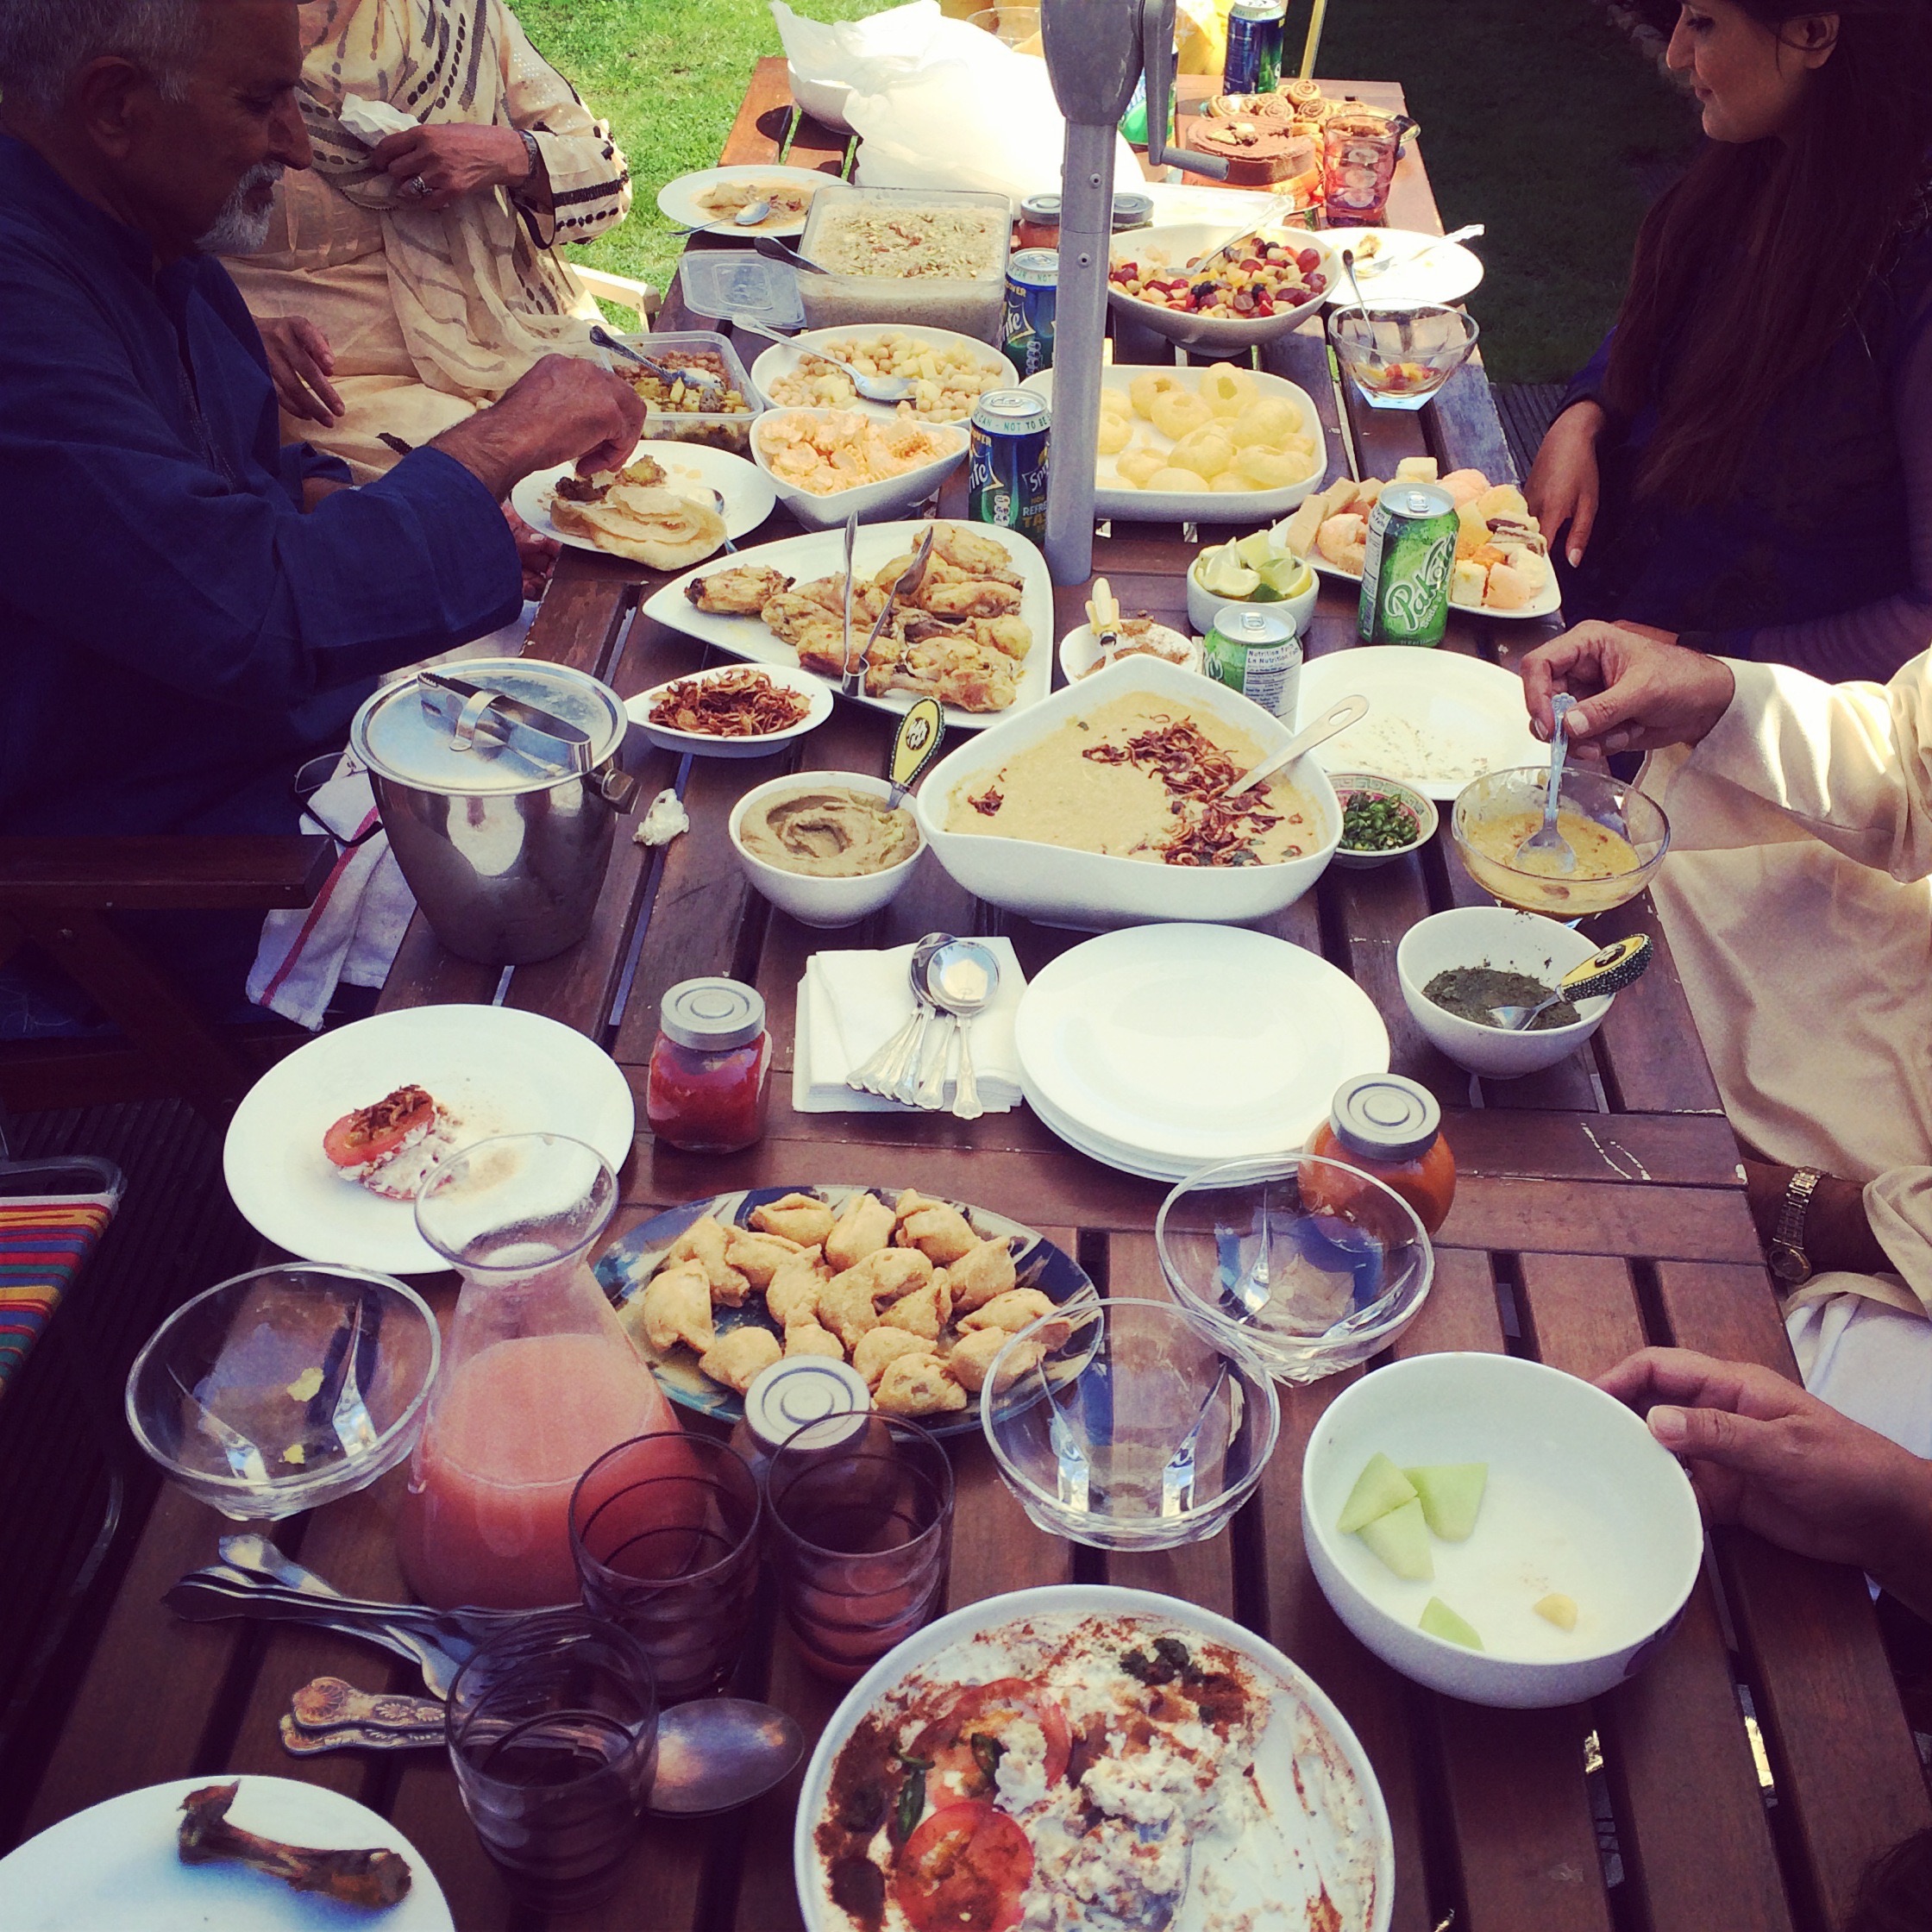 The Family Socials - Sharing platters of food around a table together